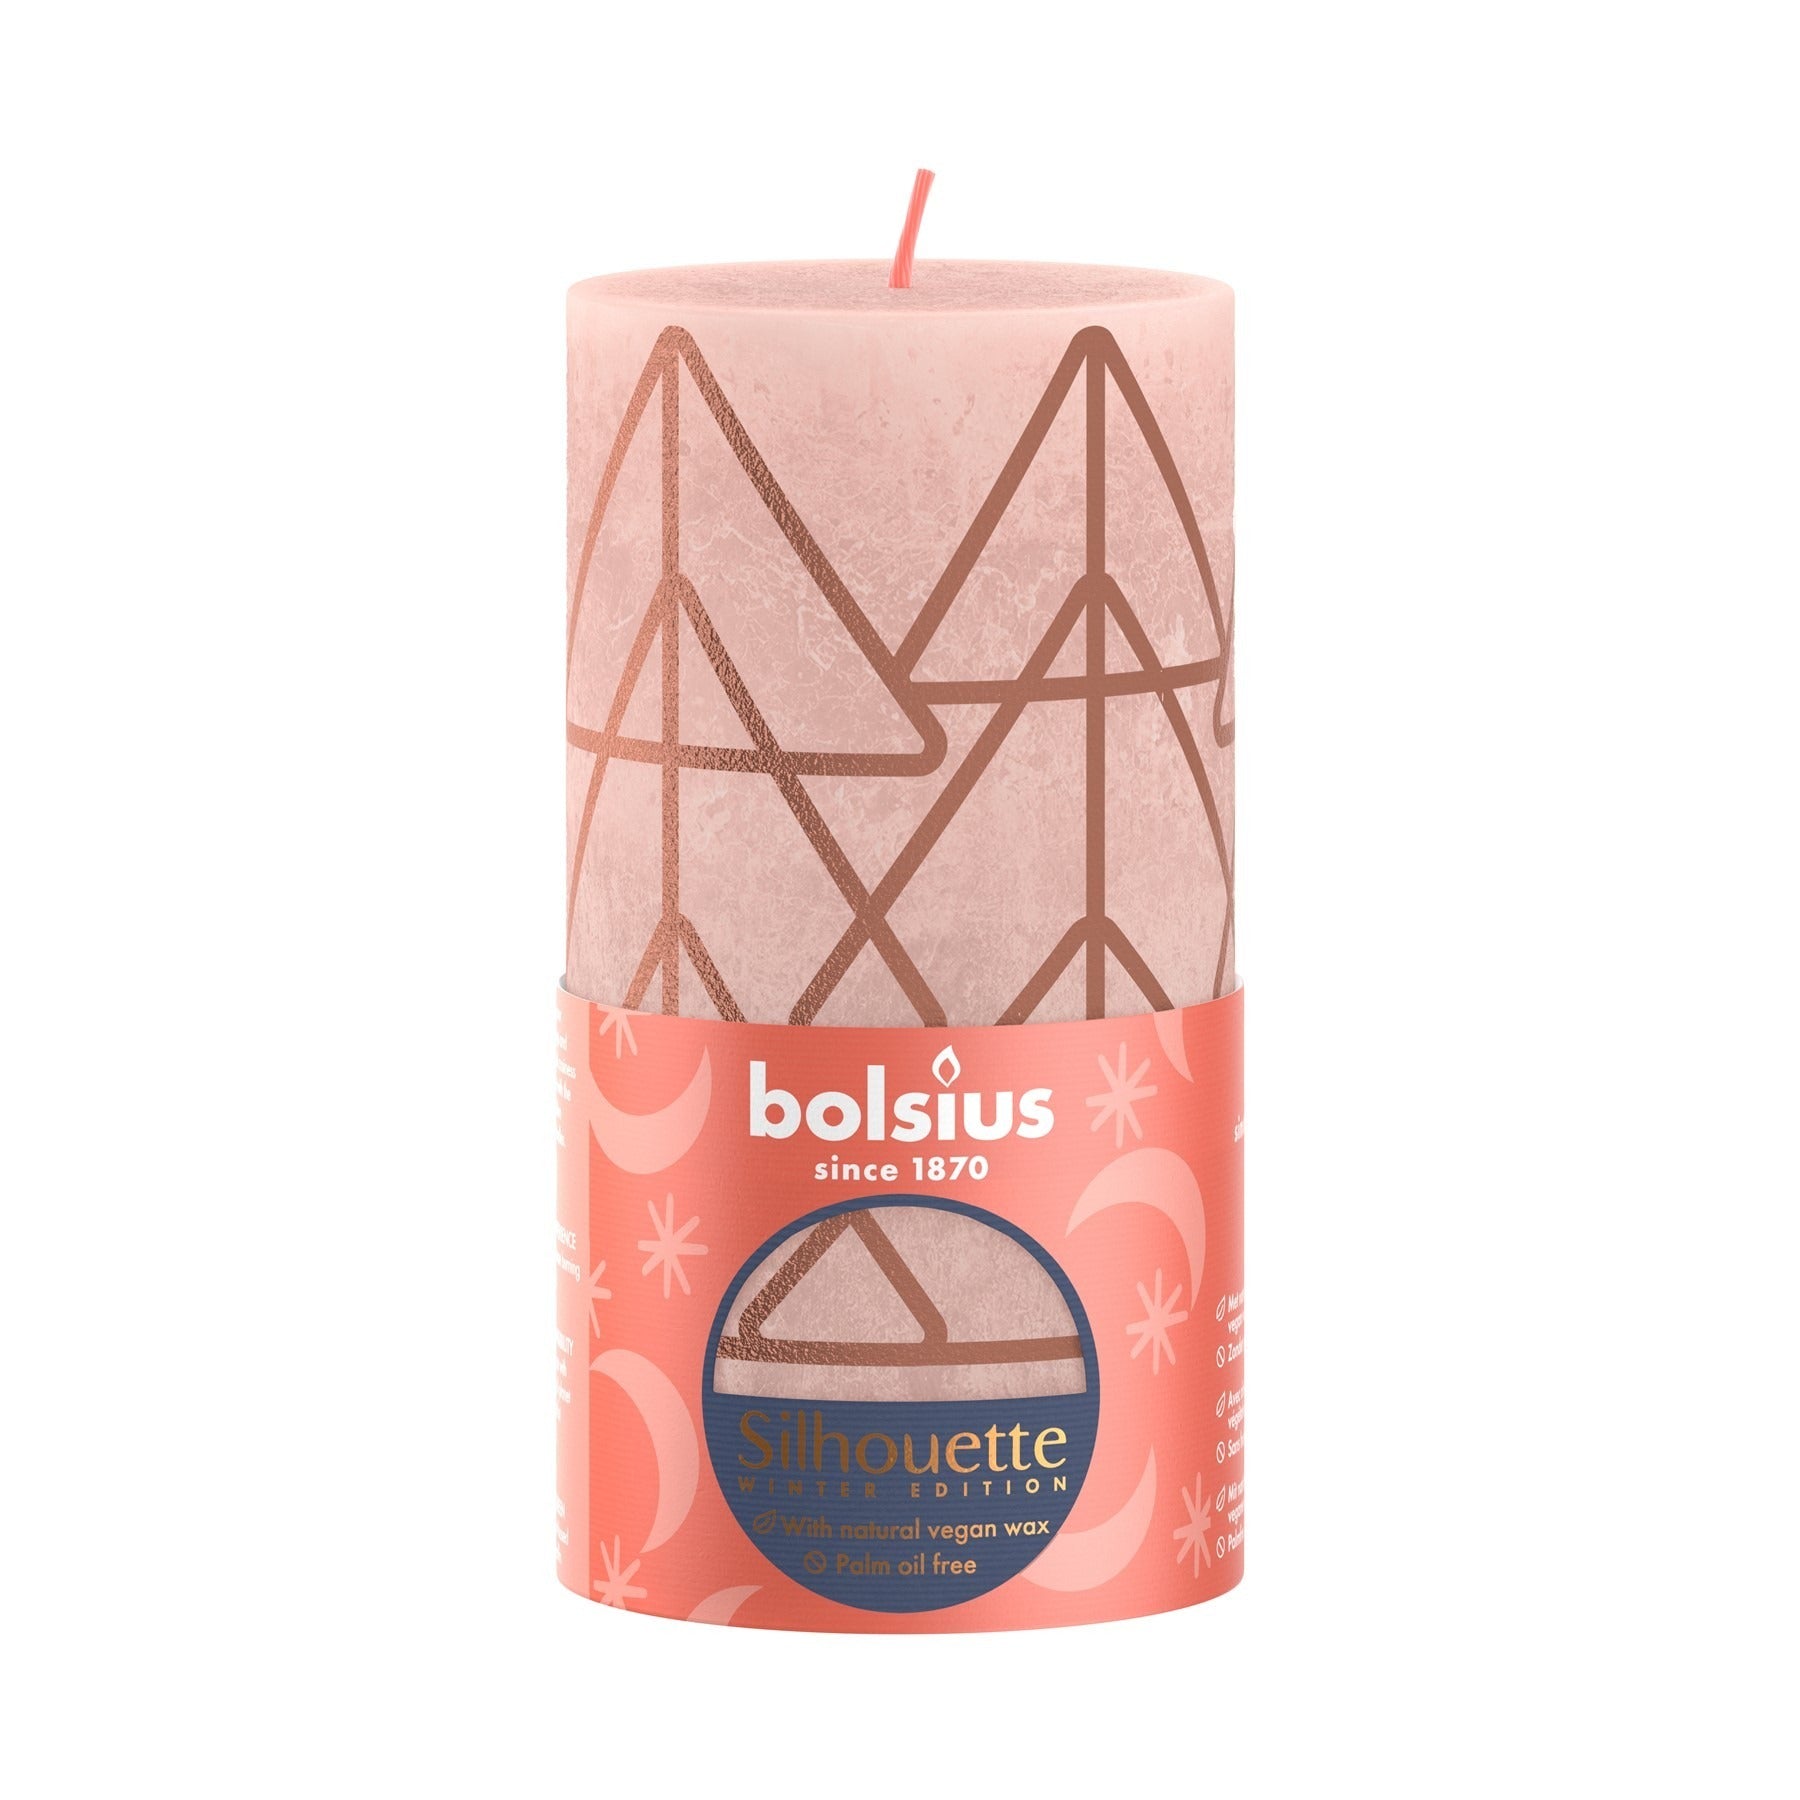 View Bolsius Pink and Print Rustic Silhouette Candle 130mm x 68mm information